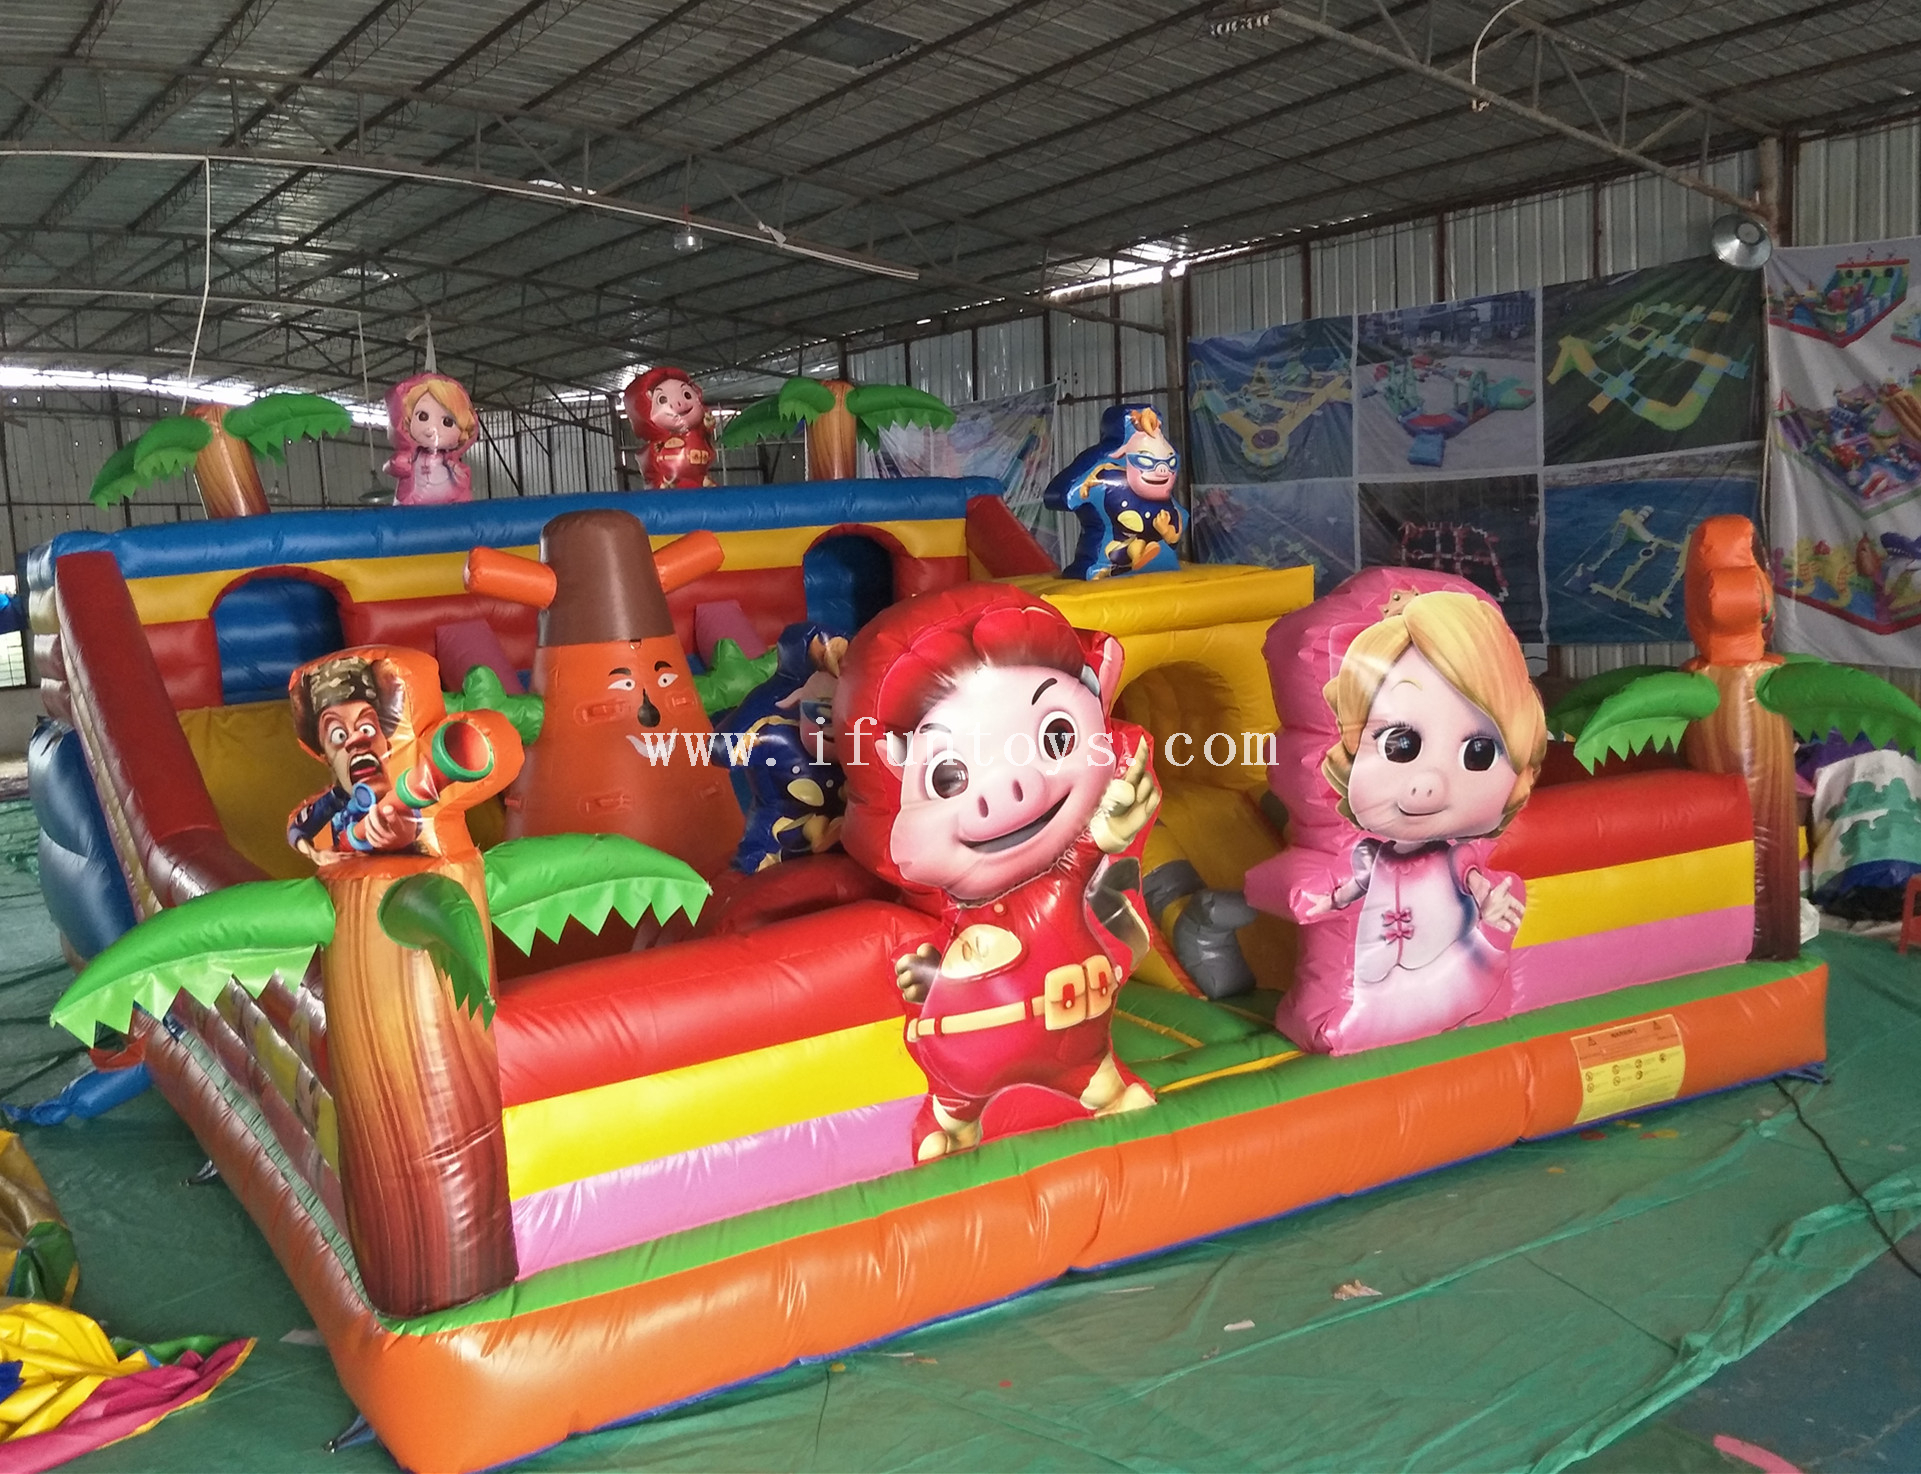 Funny Inflatable Cartoon Fun City /inflatable playground/inflatable bouncy castle for kids Amusement Park